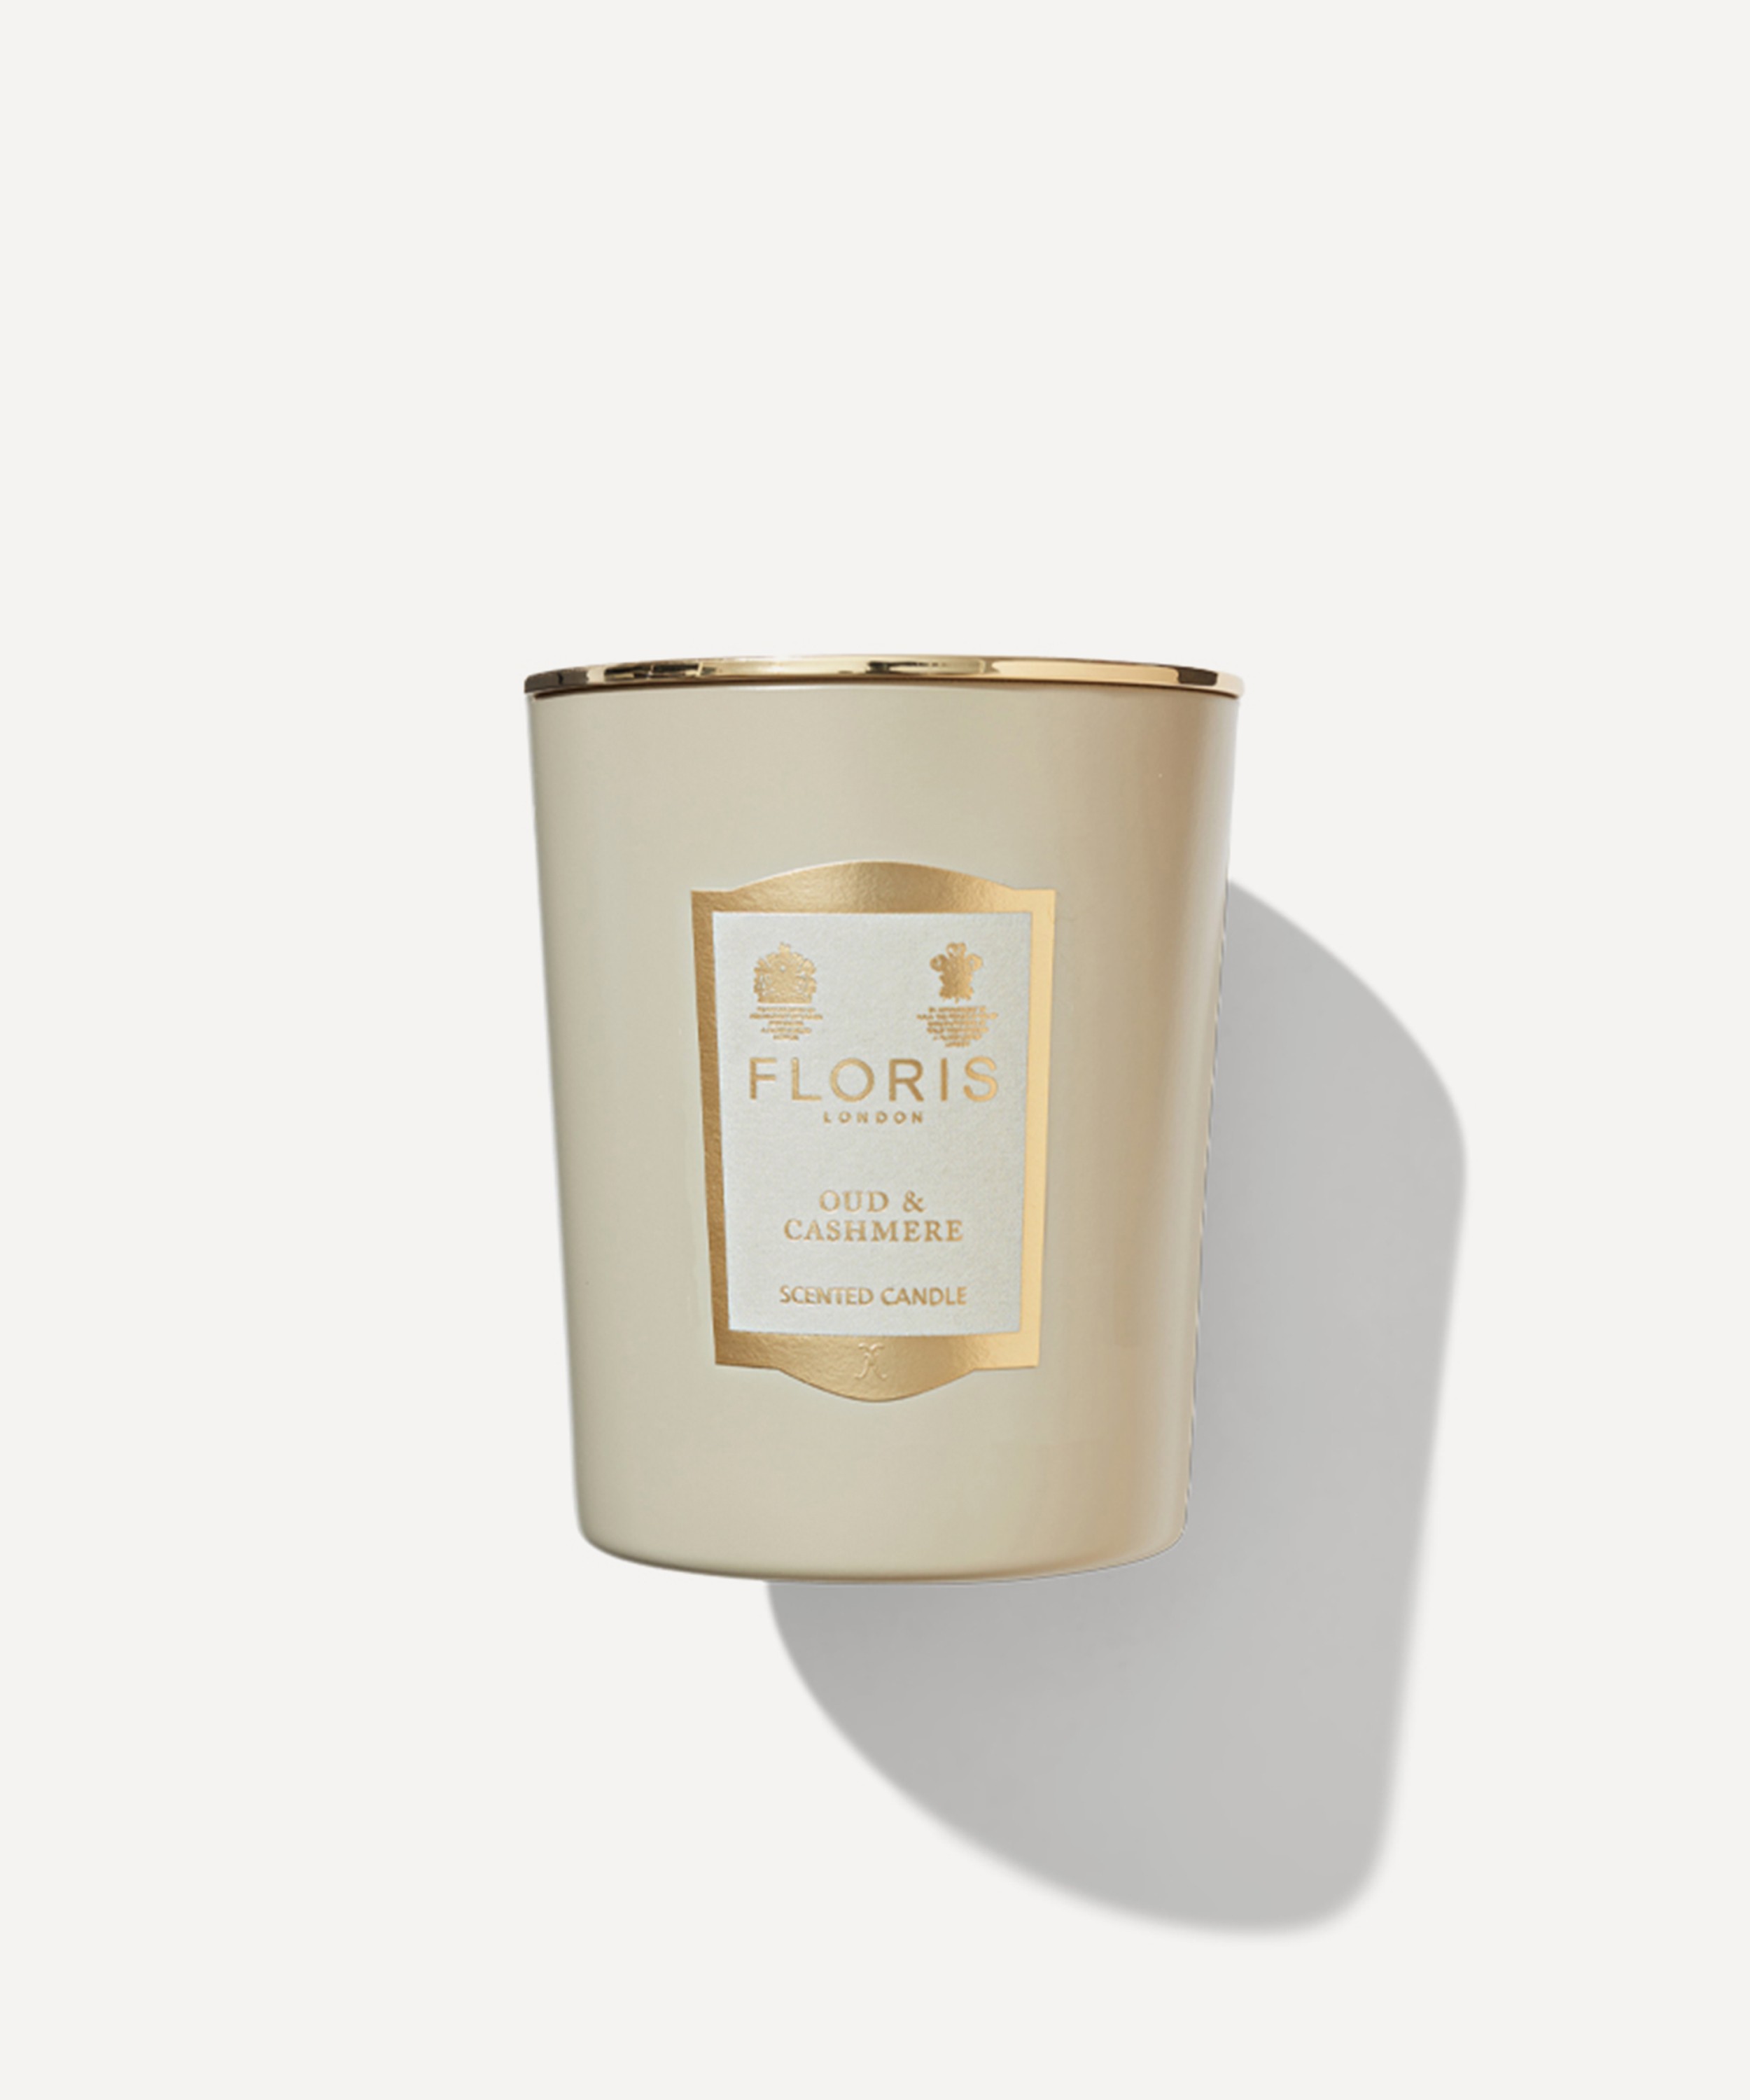 Floris London - Oud and Cashmere Scented Candle 175g image number 0